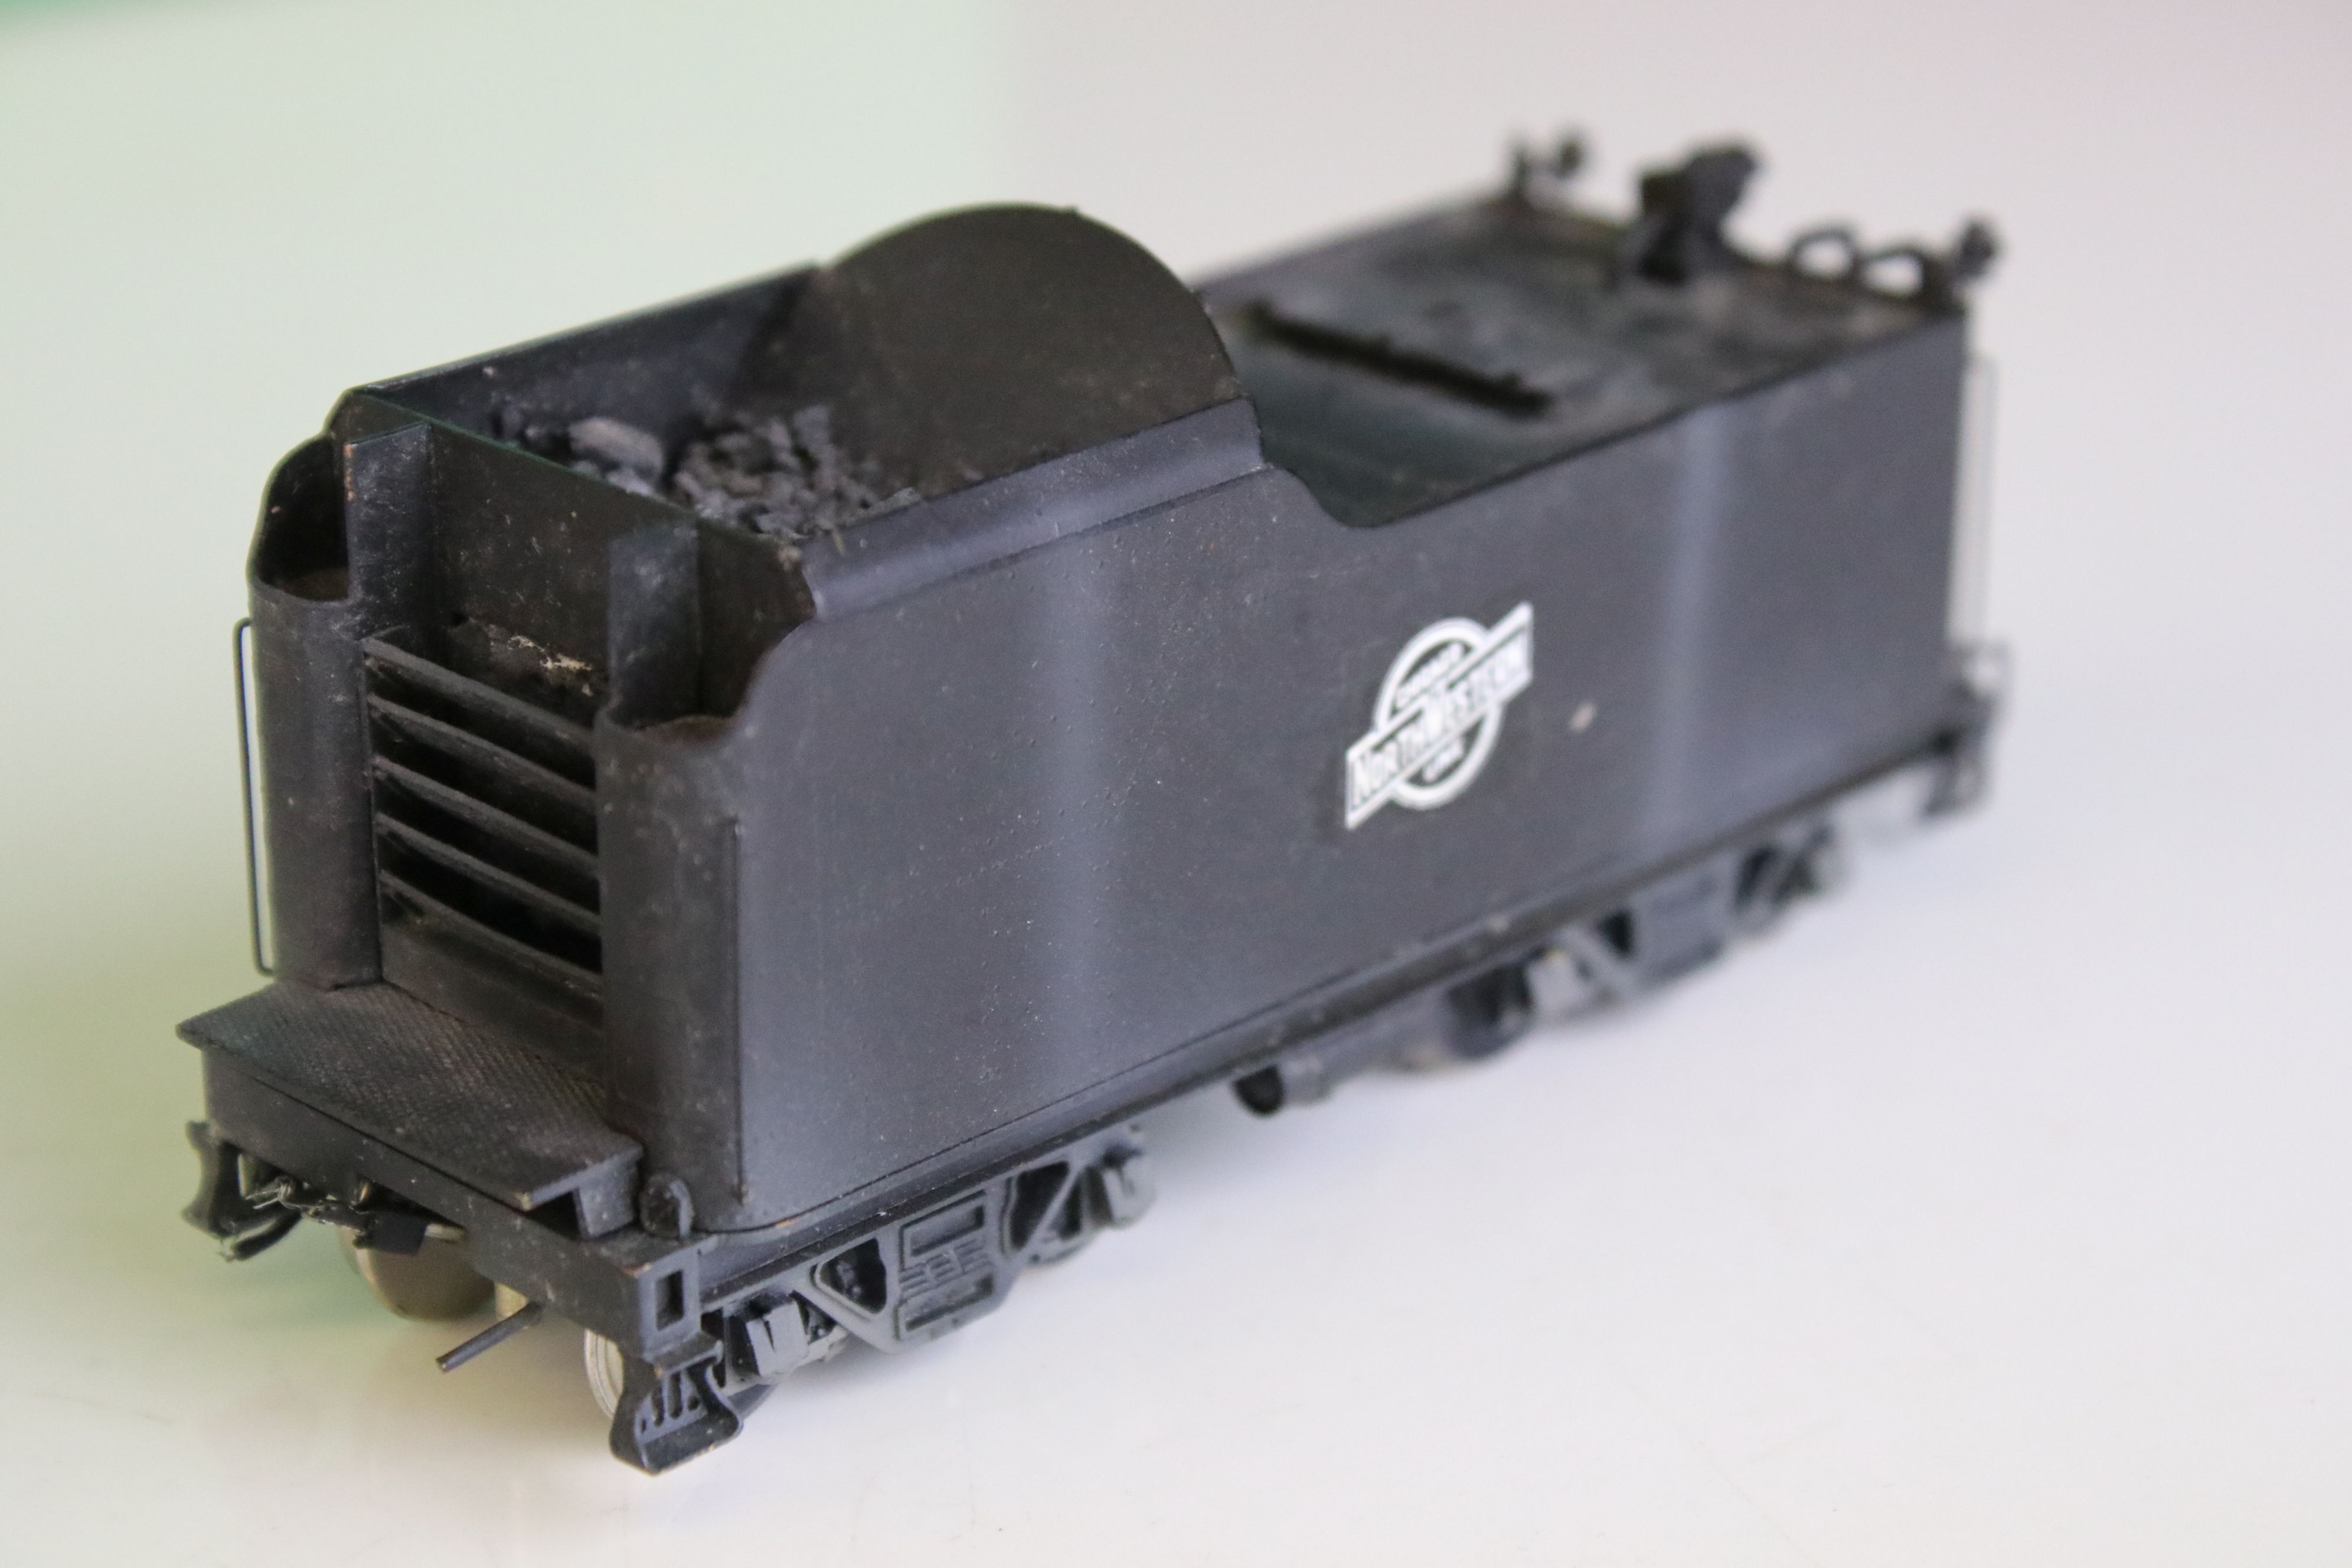 Boxed Overland Models Inc HO gauge C&NW 'D' 4-4-2 locomotive & tender with straight cylinders, - Image 6 of 13